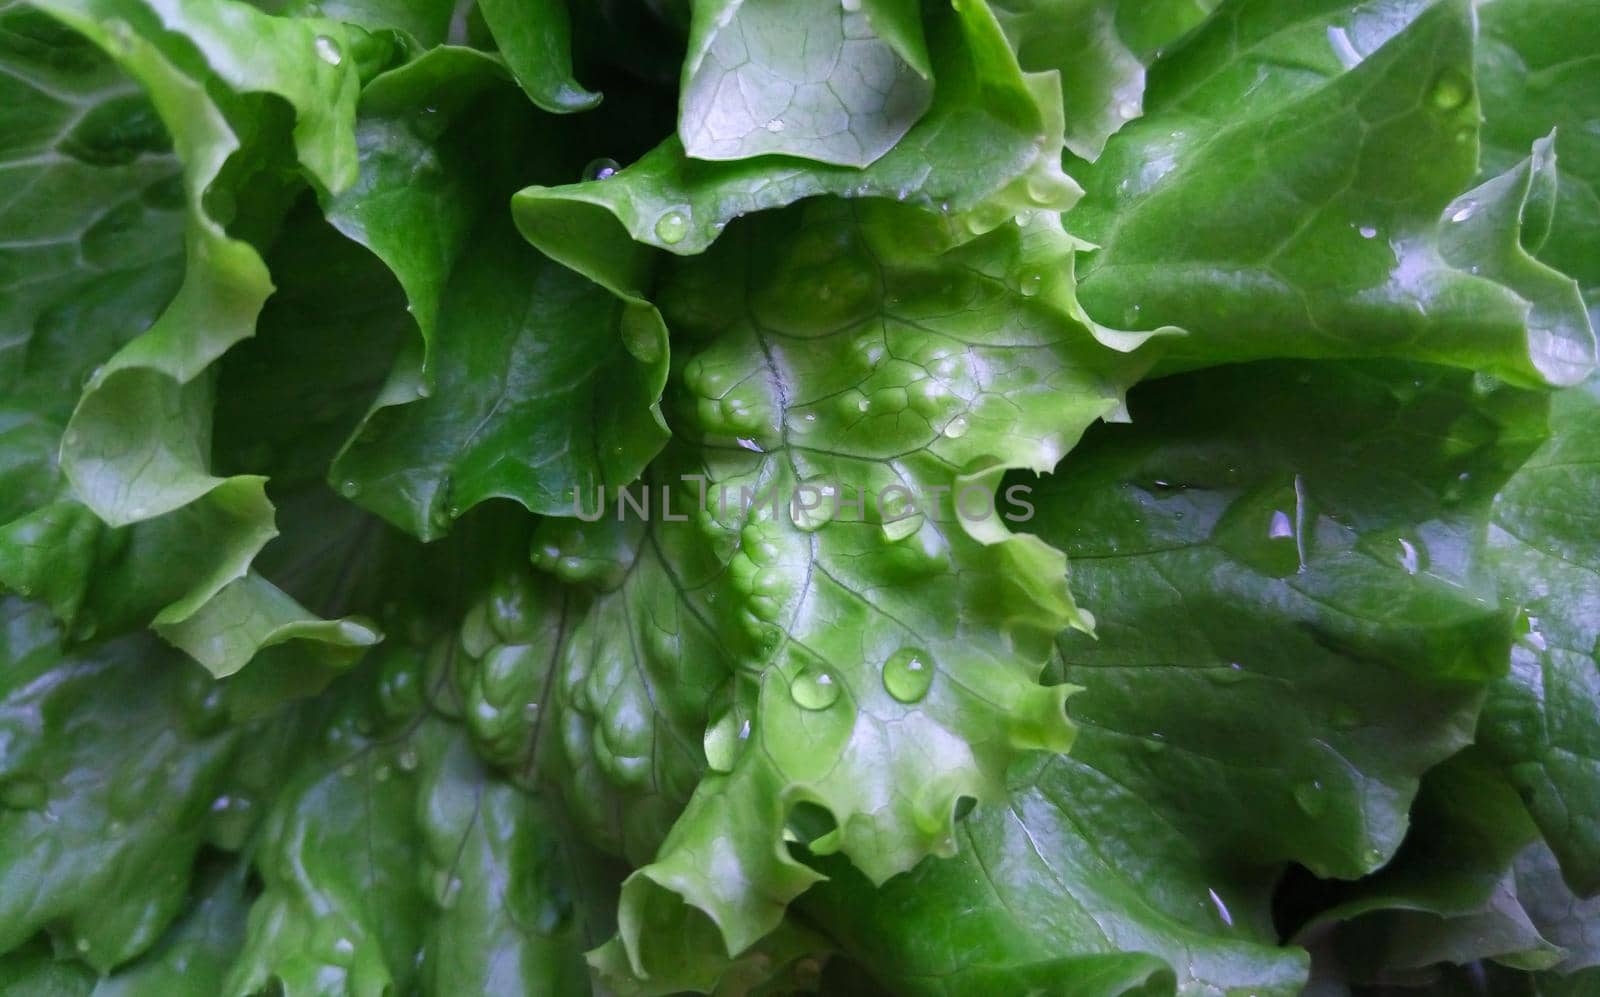 Green lettuce salad leaves and water drops close up image